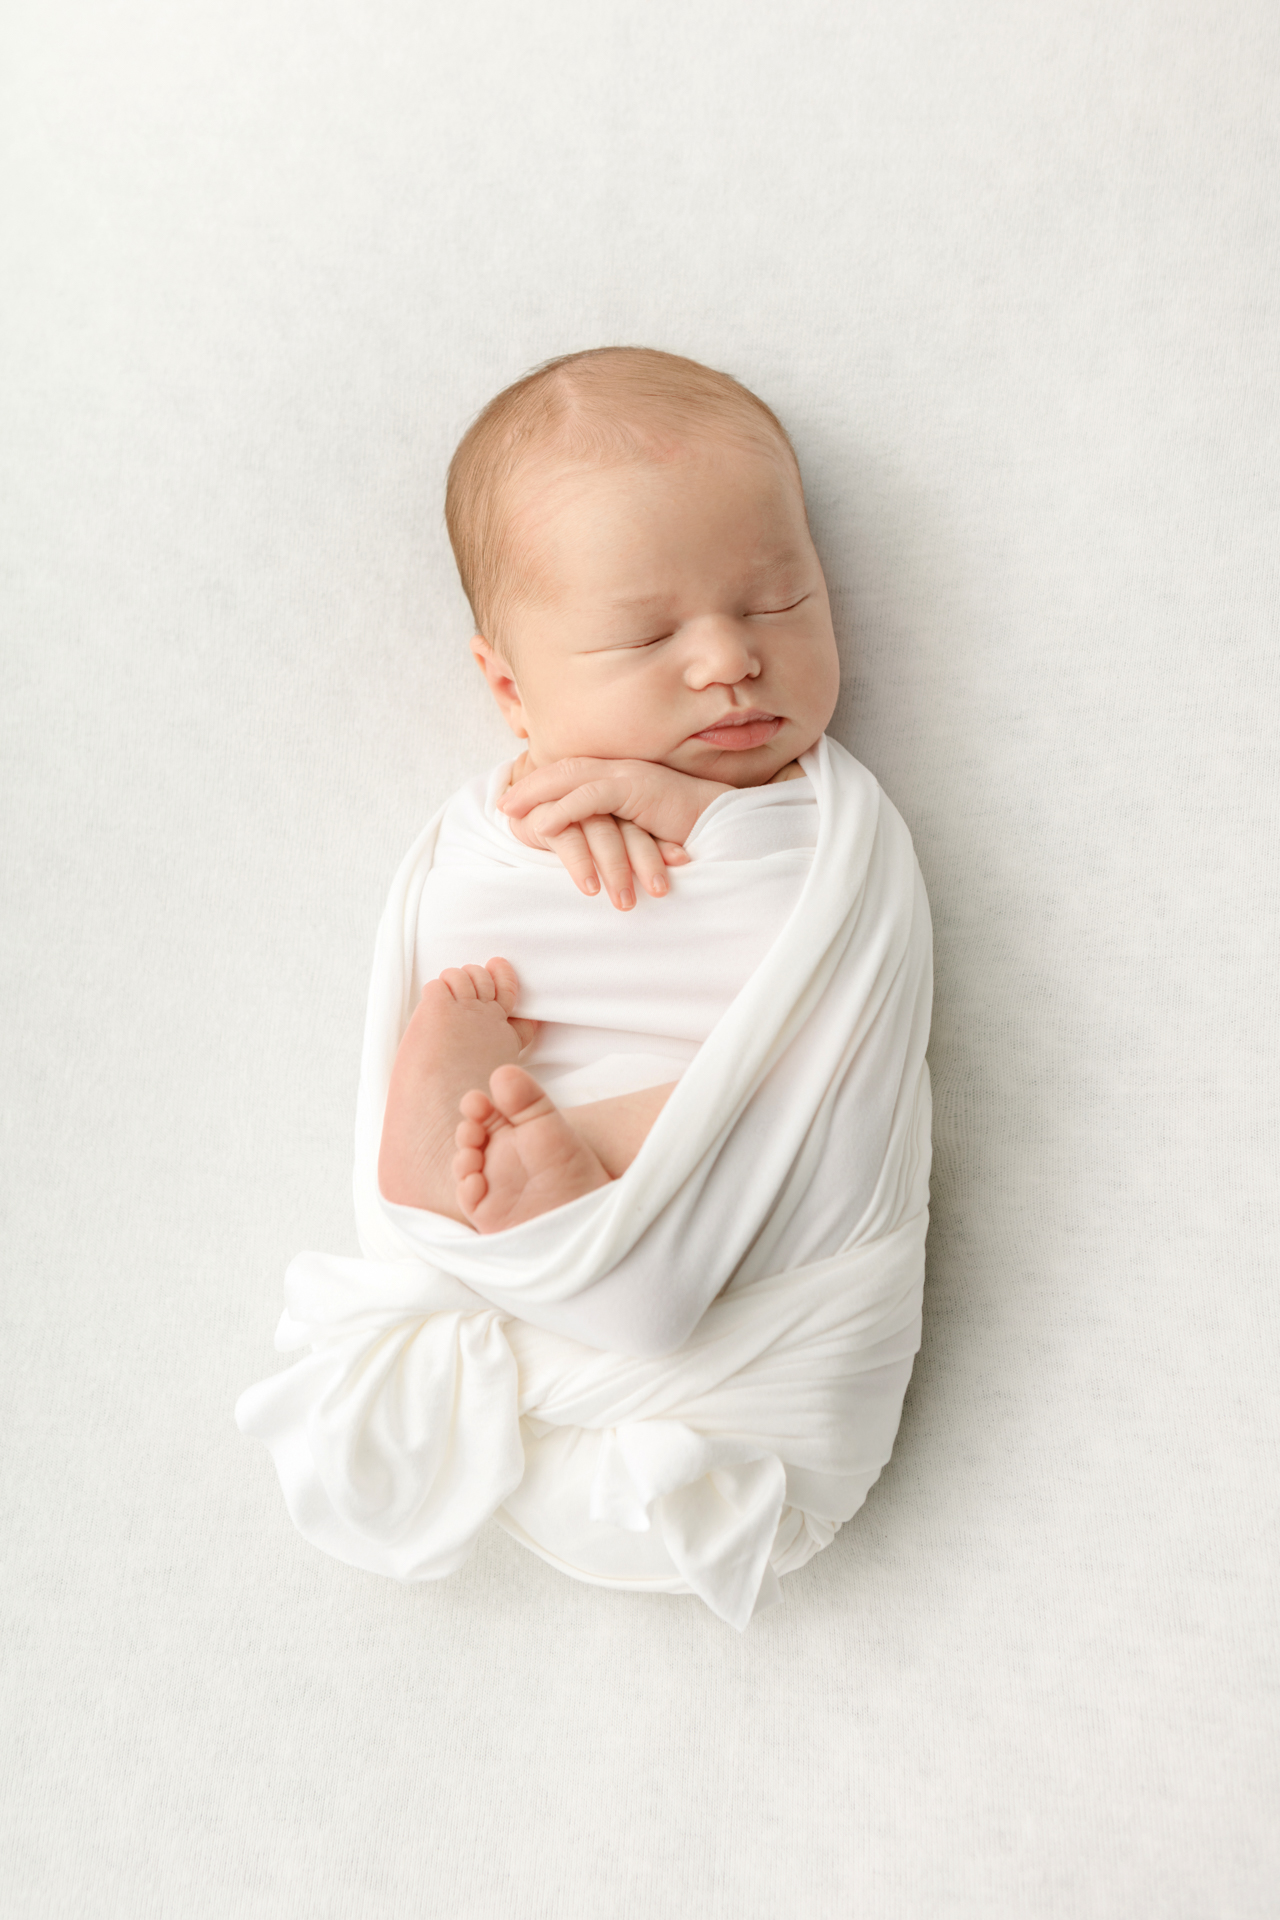 newborn baby girl swaddled in a stretchy white swaddle tied with a loose knot